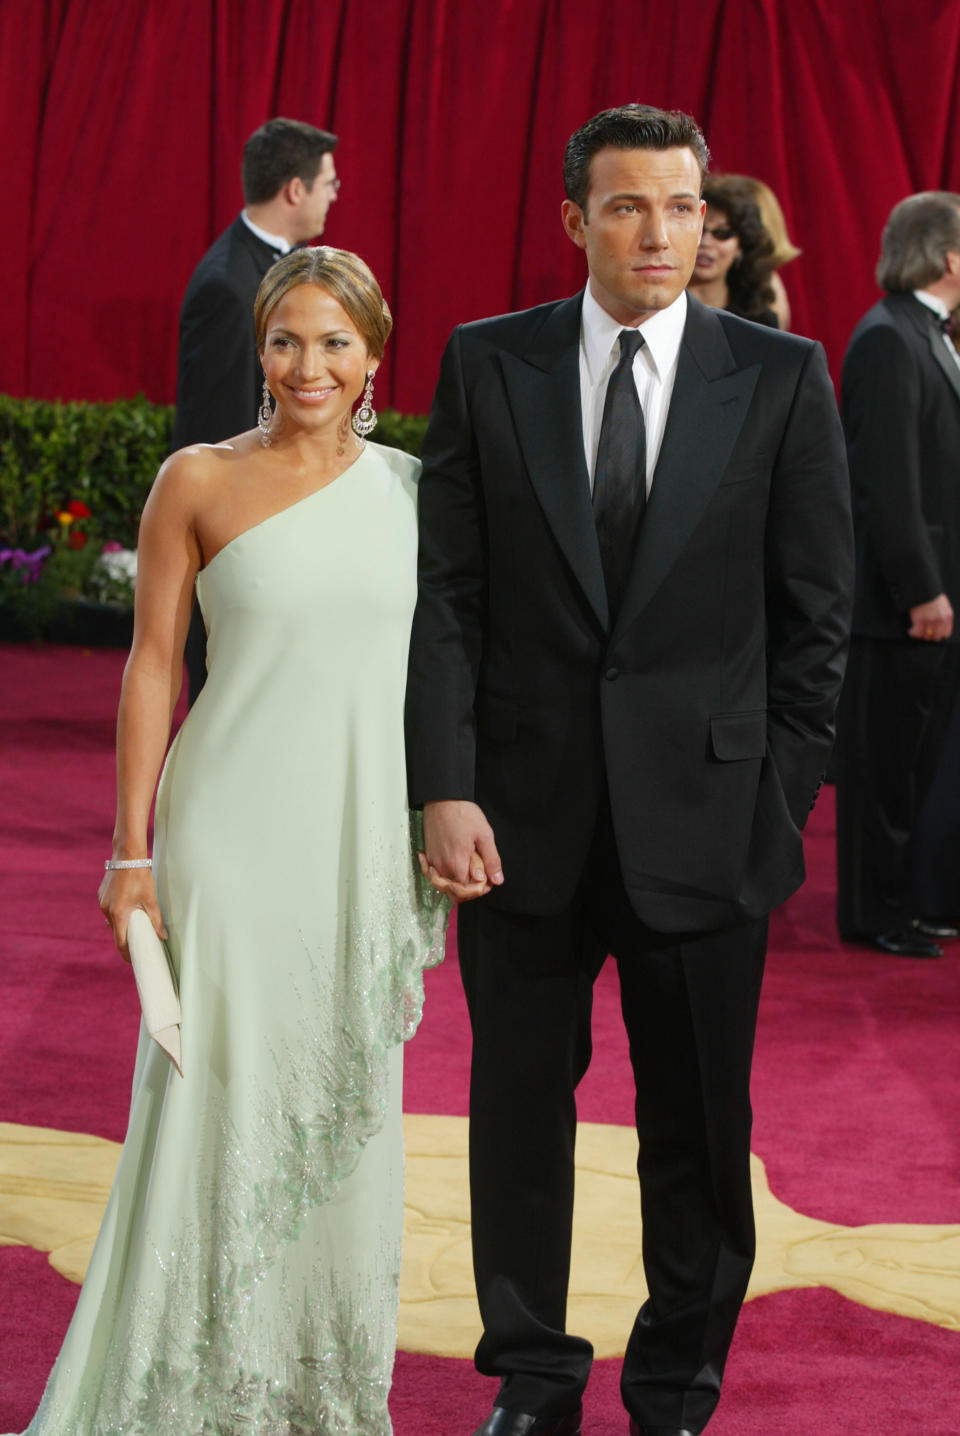 HOLLYWOOD - MARCH 23:  Actress Jennifer Lopez, wearing Harry Winston jewelry, and actor Ben Affleck attend the 75th Annual Academy Awards at the Kodak Theater on March 23, 2003 in Hollywood, California.  (Photo by Kevin Winter/Getty Images)